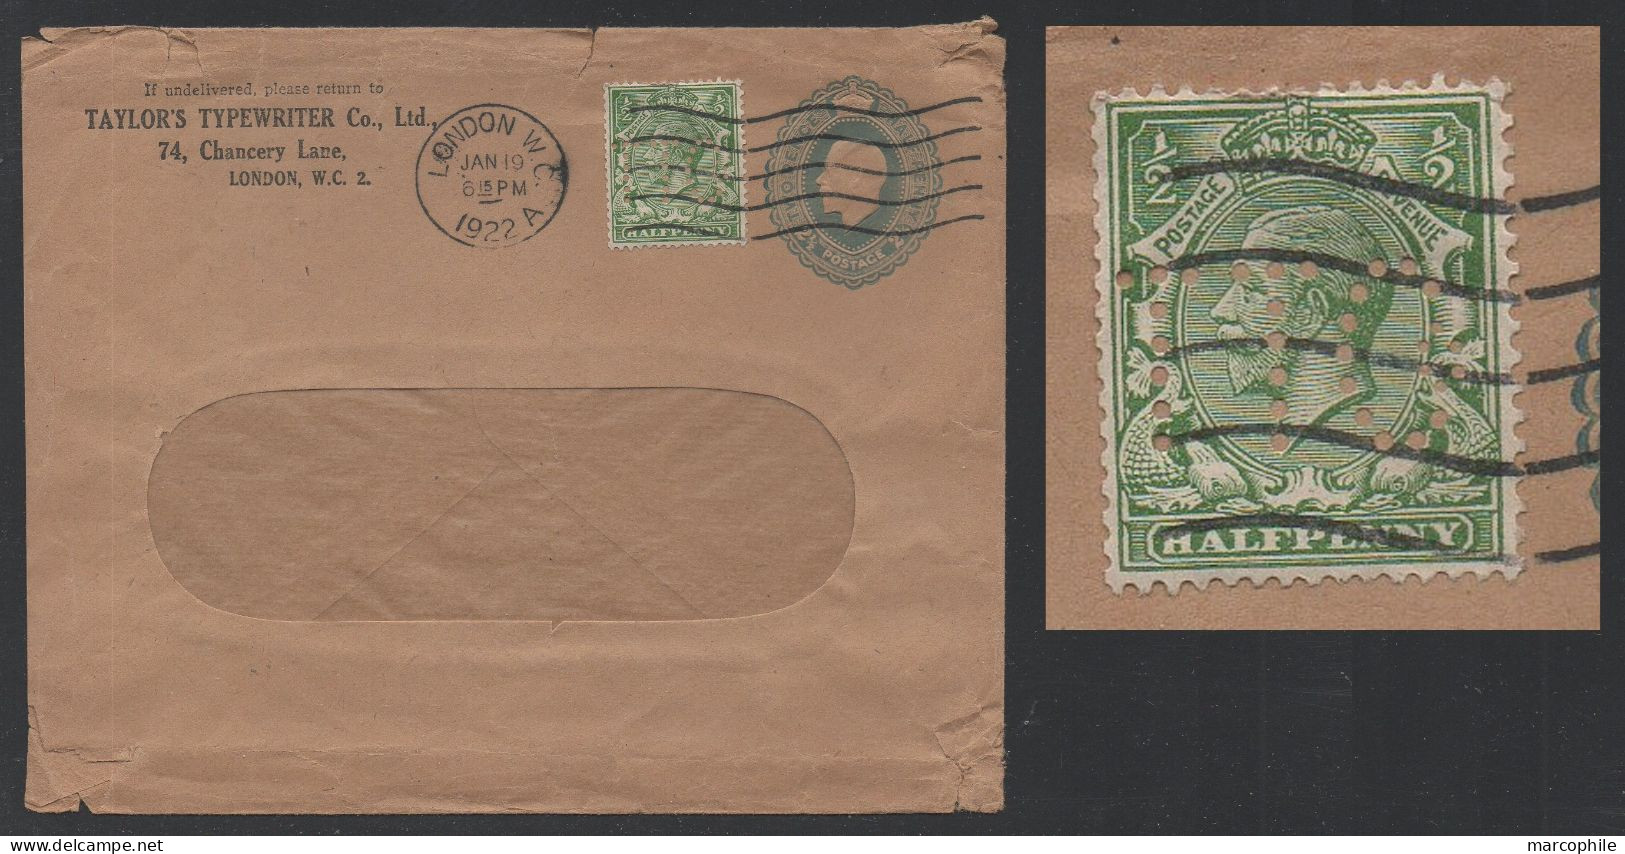 GB / 192 PERFIN "TTCo" (TAYLOR'S TYPEWRITER Co) WAX SEAL ON PRIVATE POSTAL STATIONERY ENVELOPE (ref 9012) - Perforés